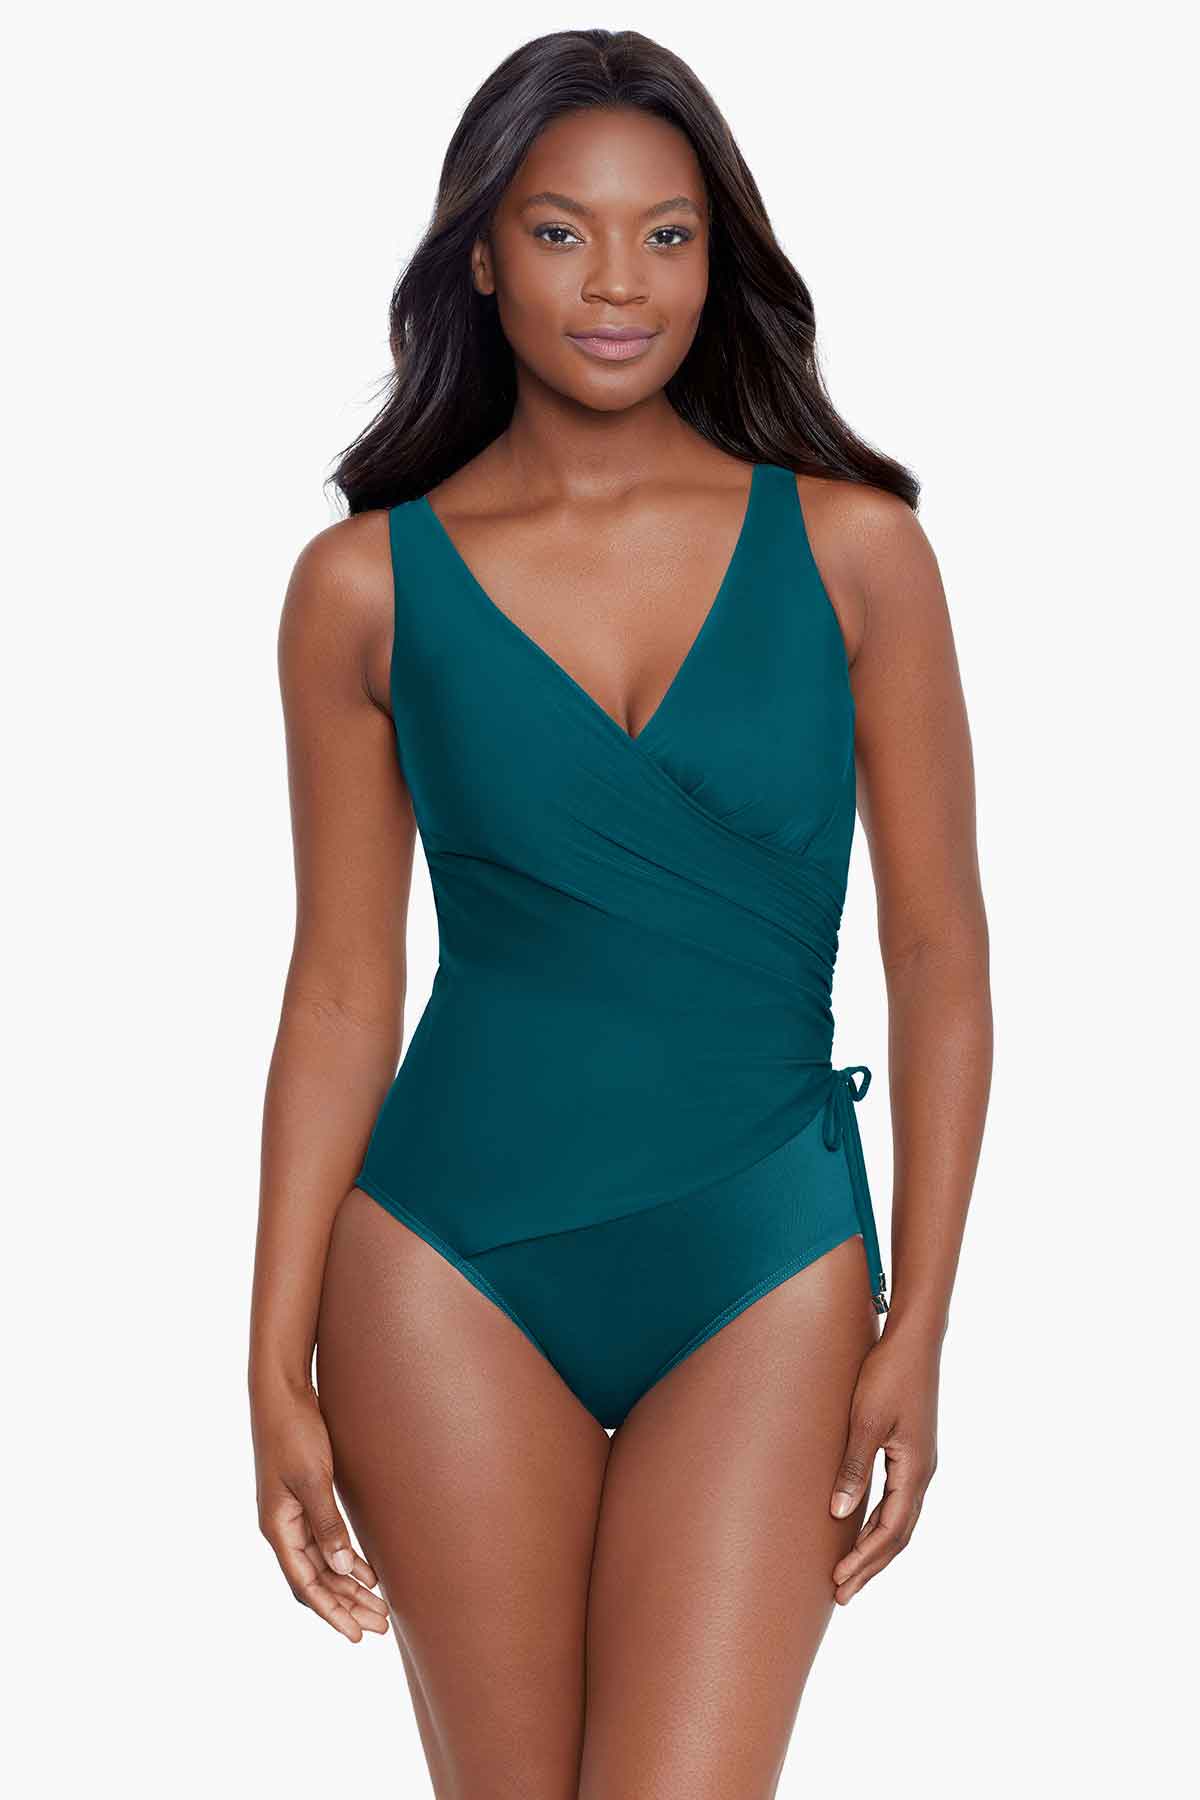 Swimsuits by Cup Size – Miraclesuit